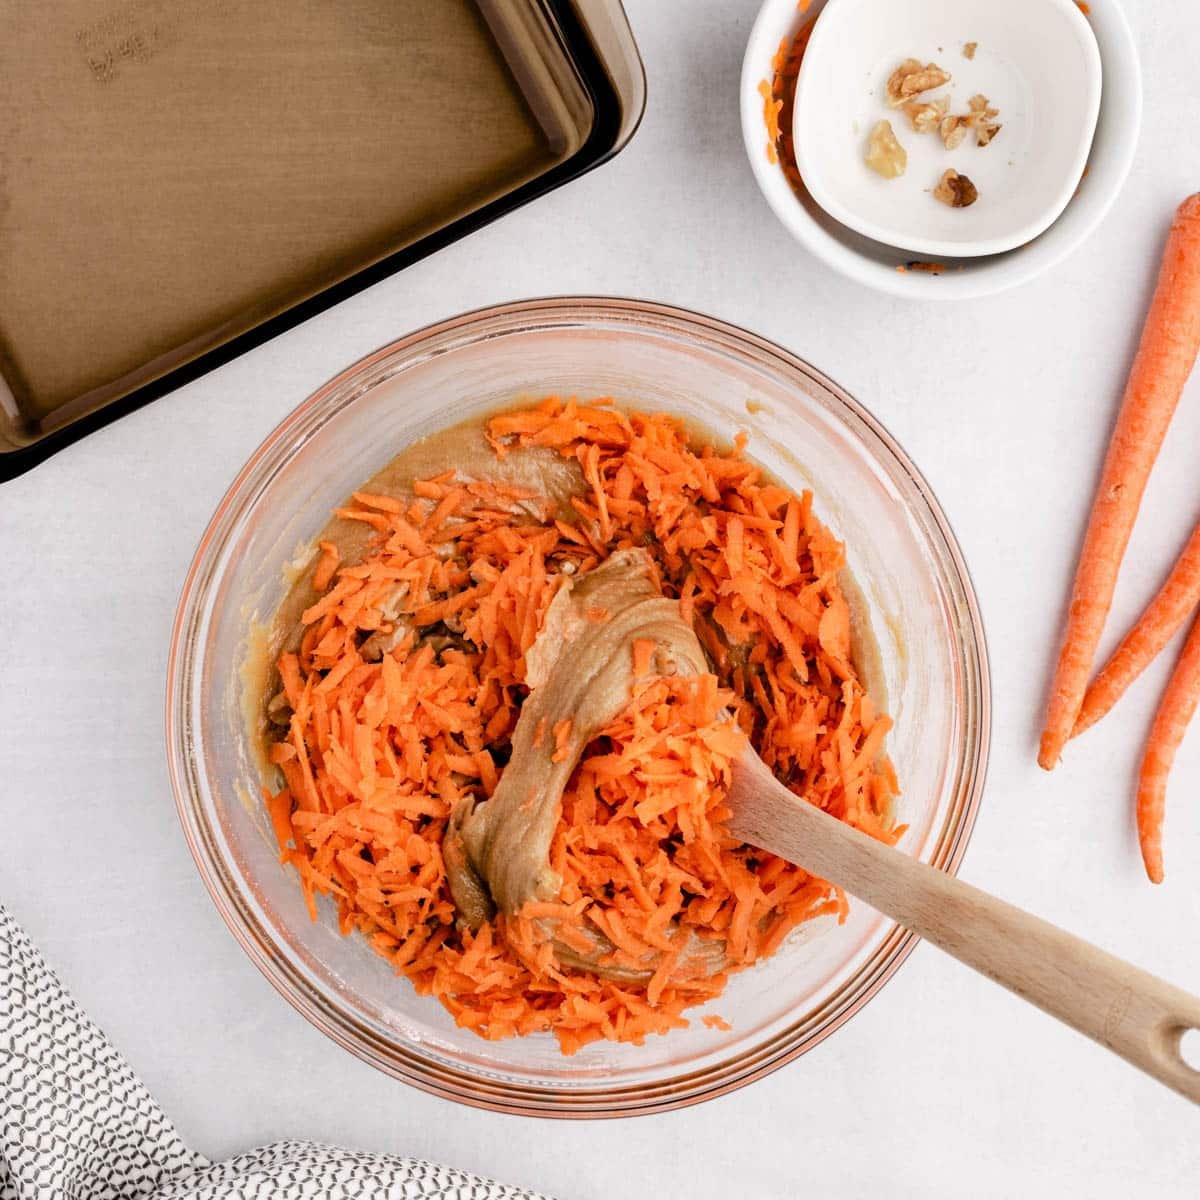 folding shredded carrots into a mixing bowl with cake batter